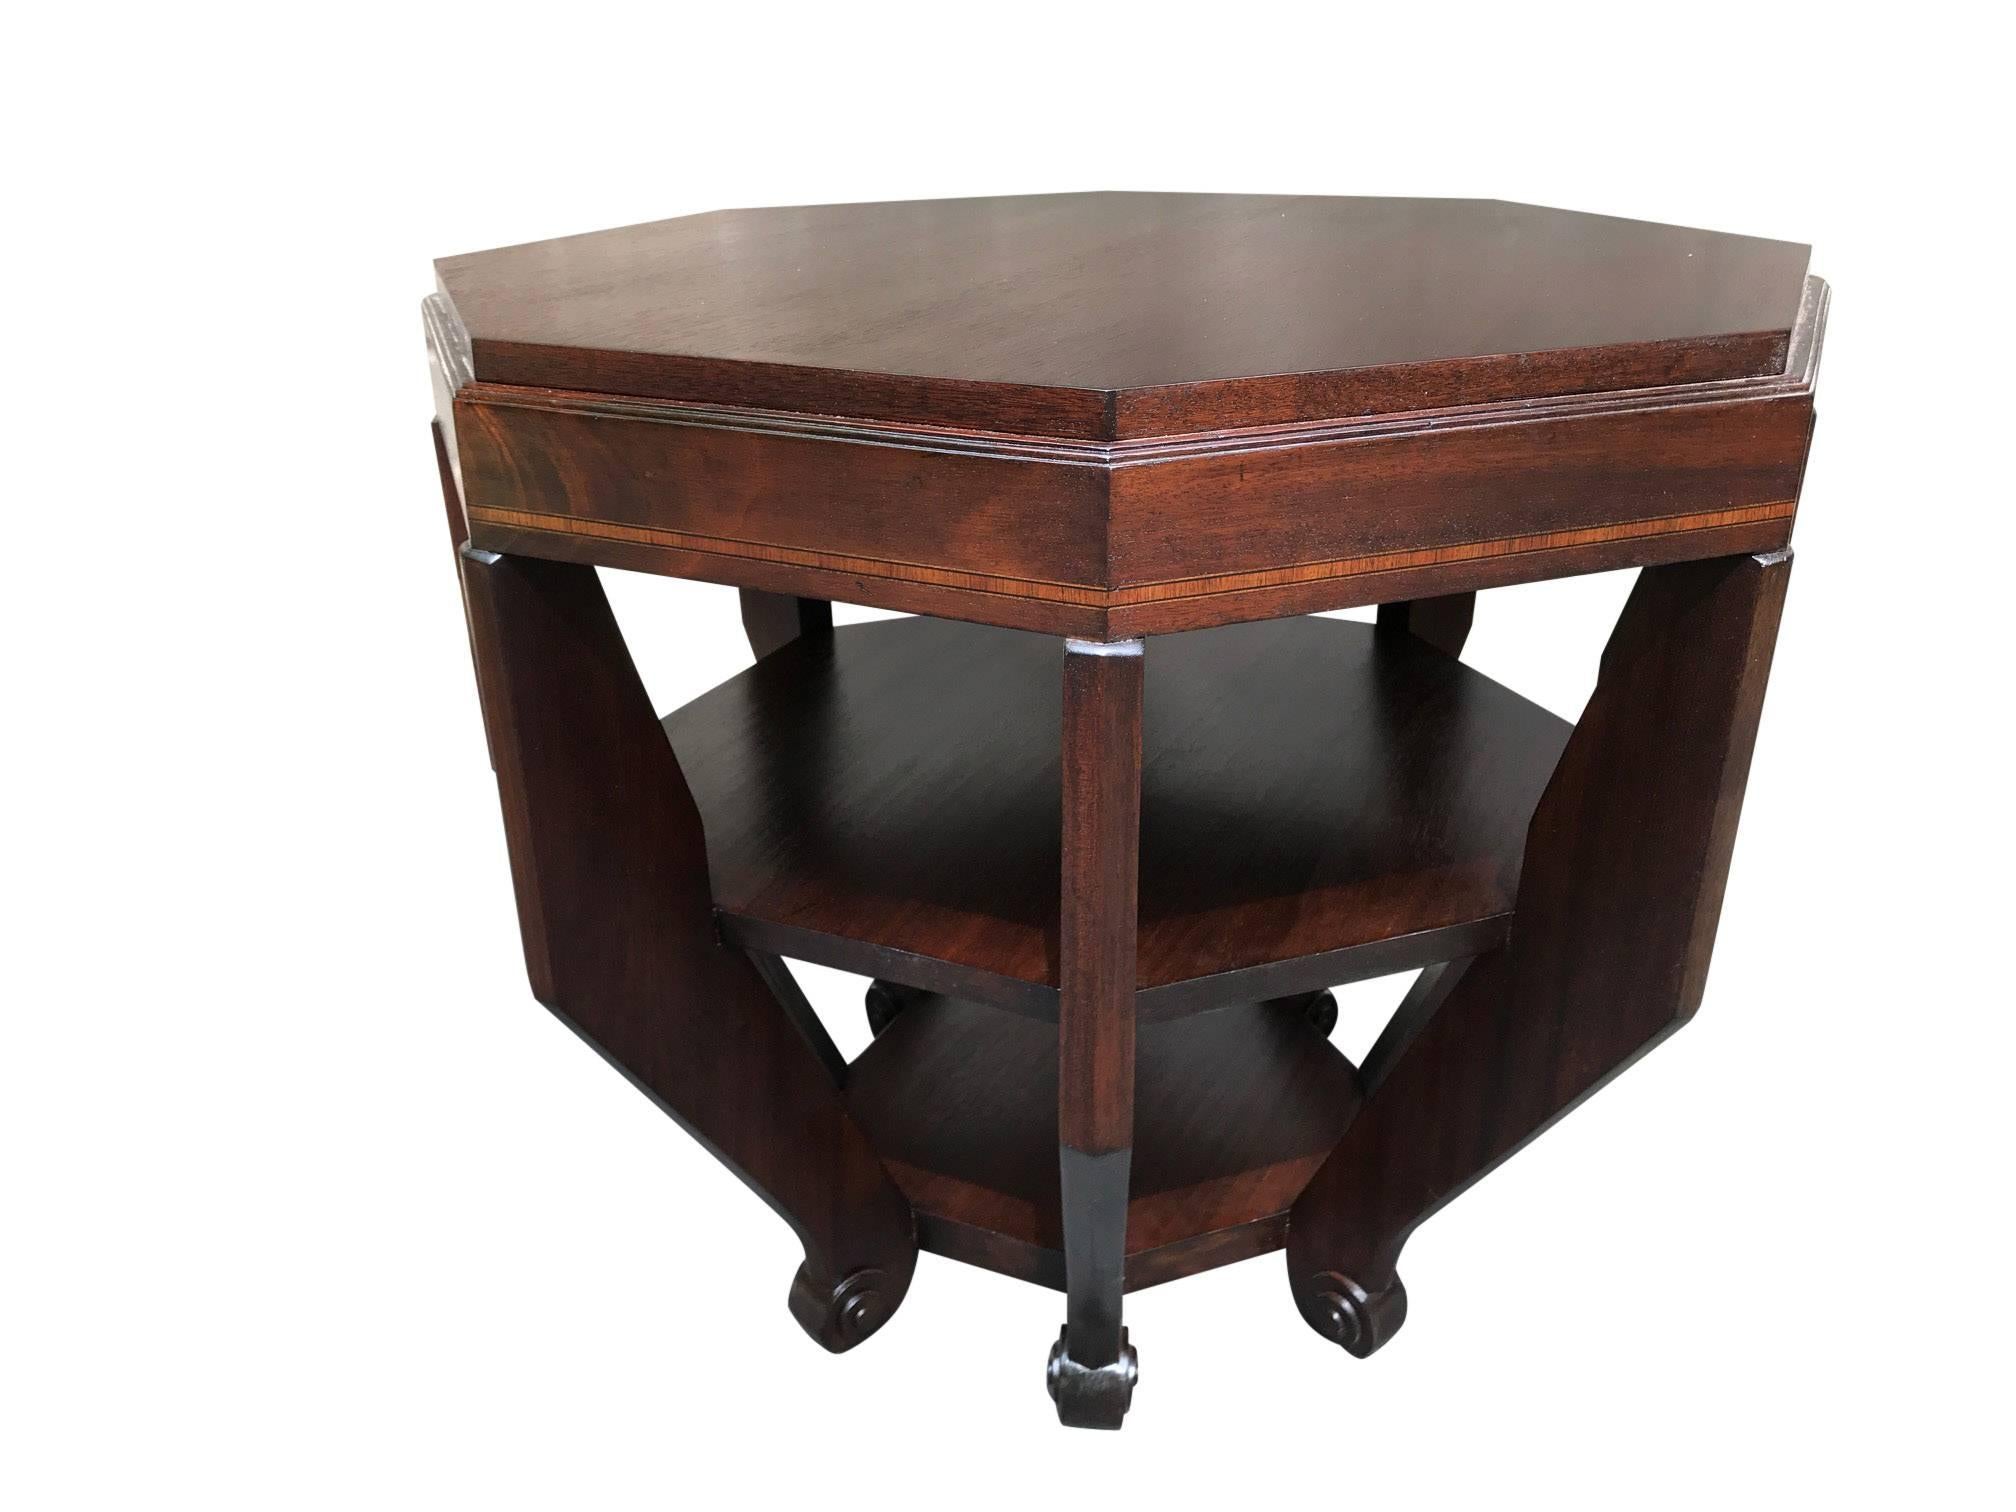 A fine period French Art Deco octagonal occasional table. Expertly refinished mahogany frame with satinwood inlay.